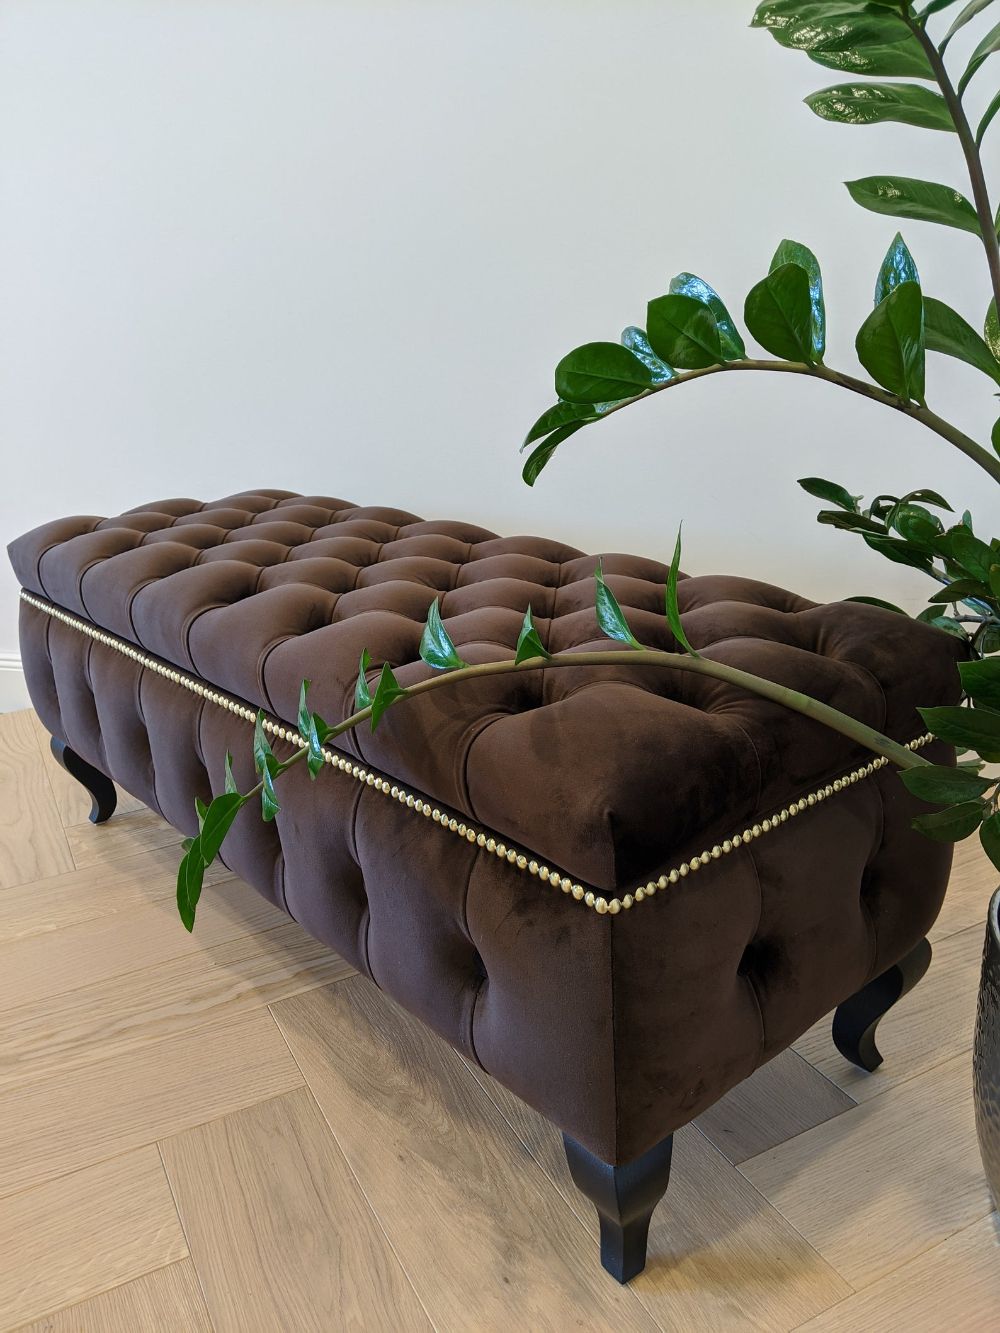 Brown Large Velvet Ottoman With Storage Box, Velvet Entryway Bench Intended For Gray Velvet Ottomans With Ample Storage (View 10 of 20)